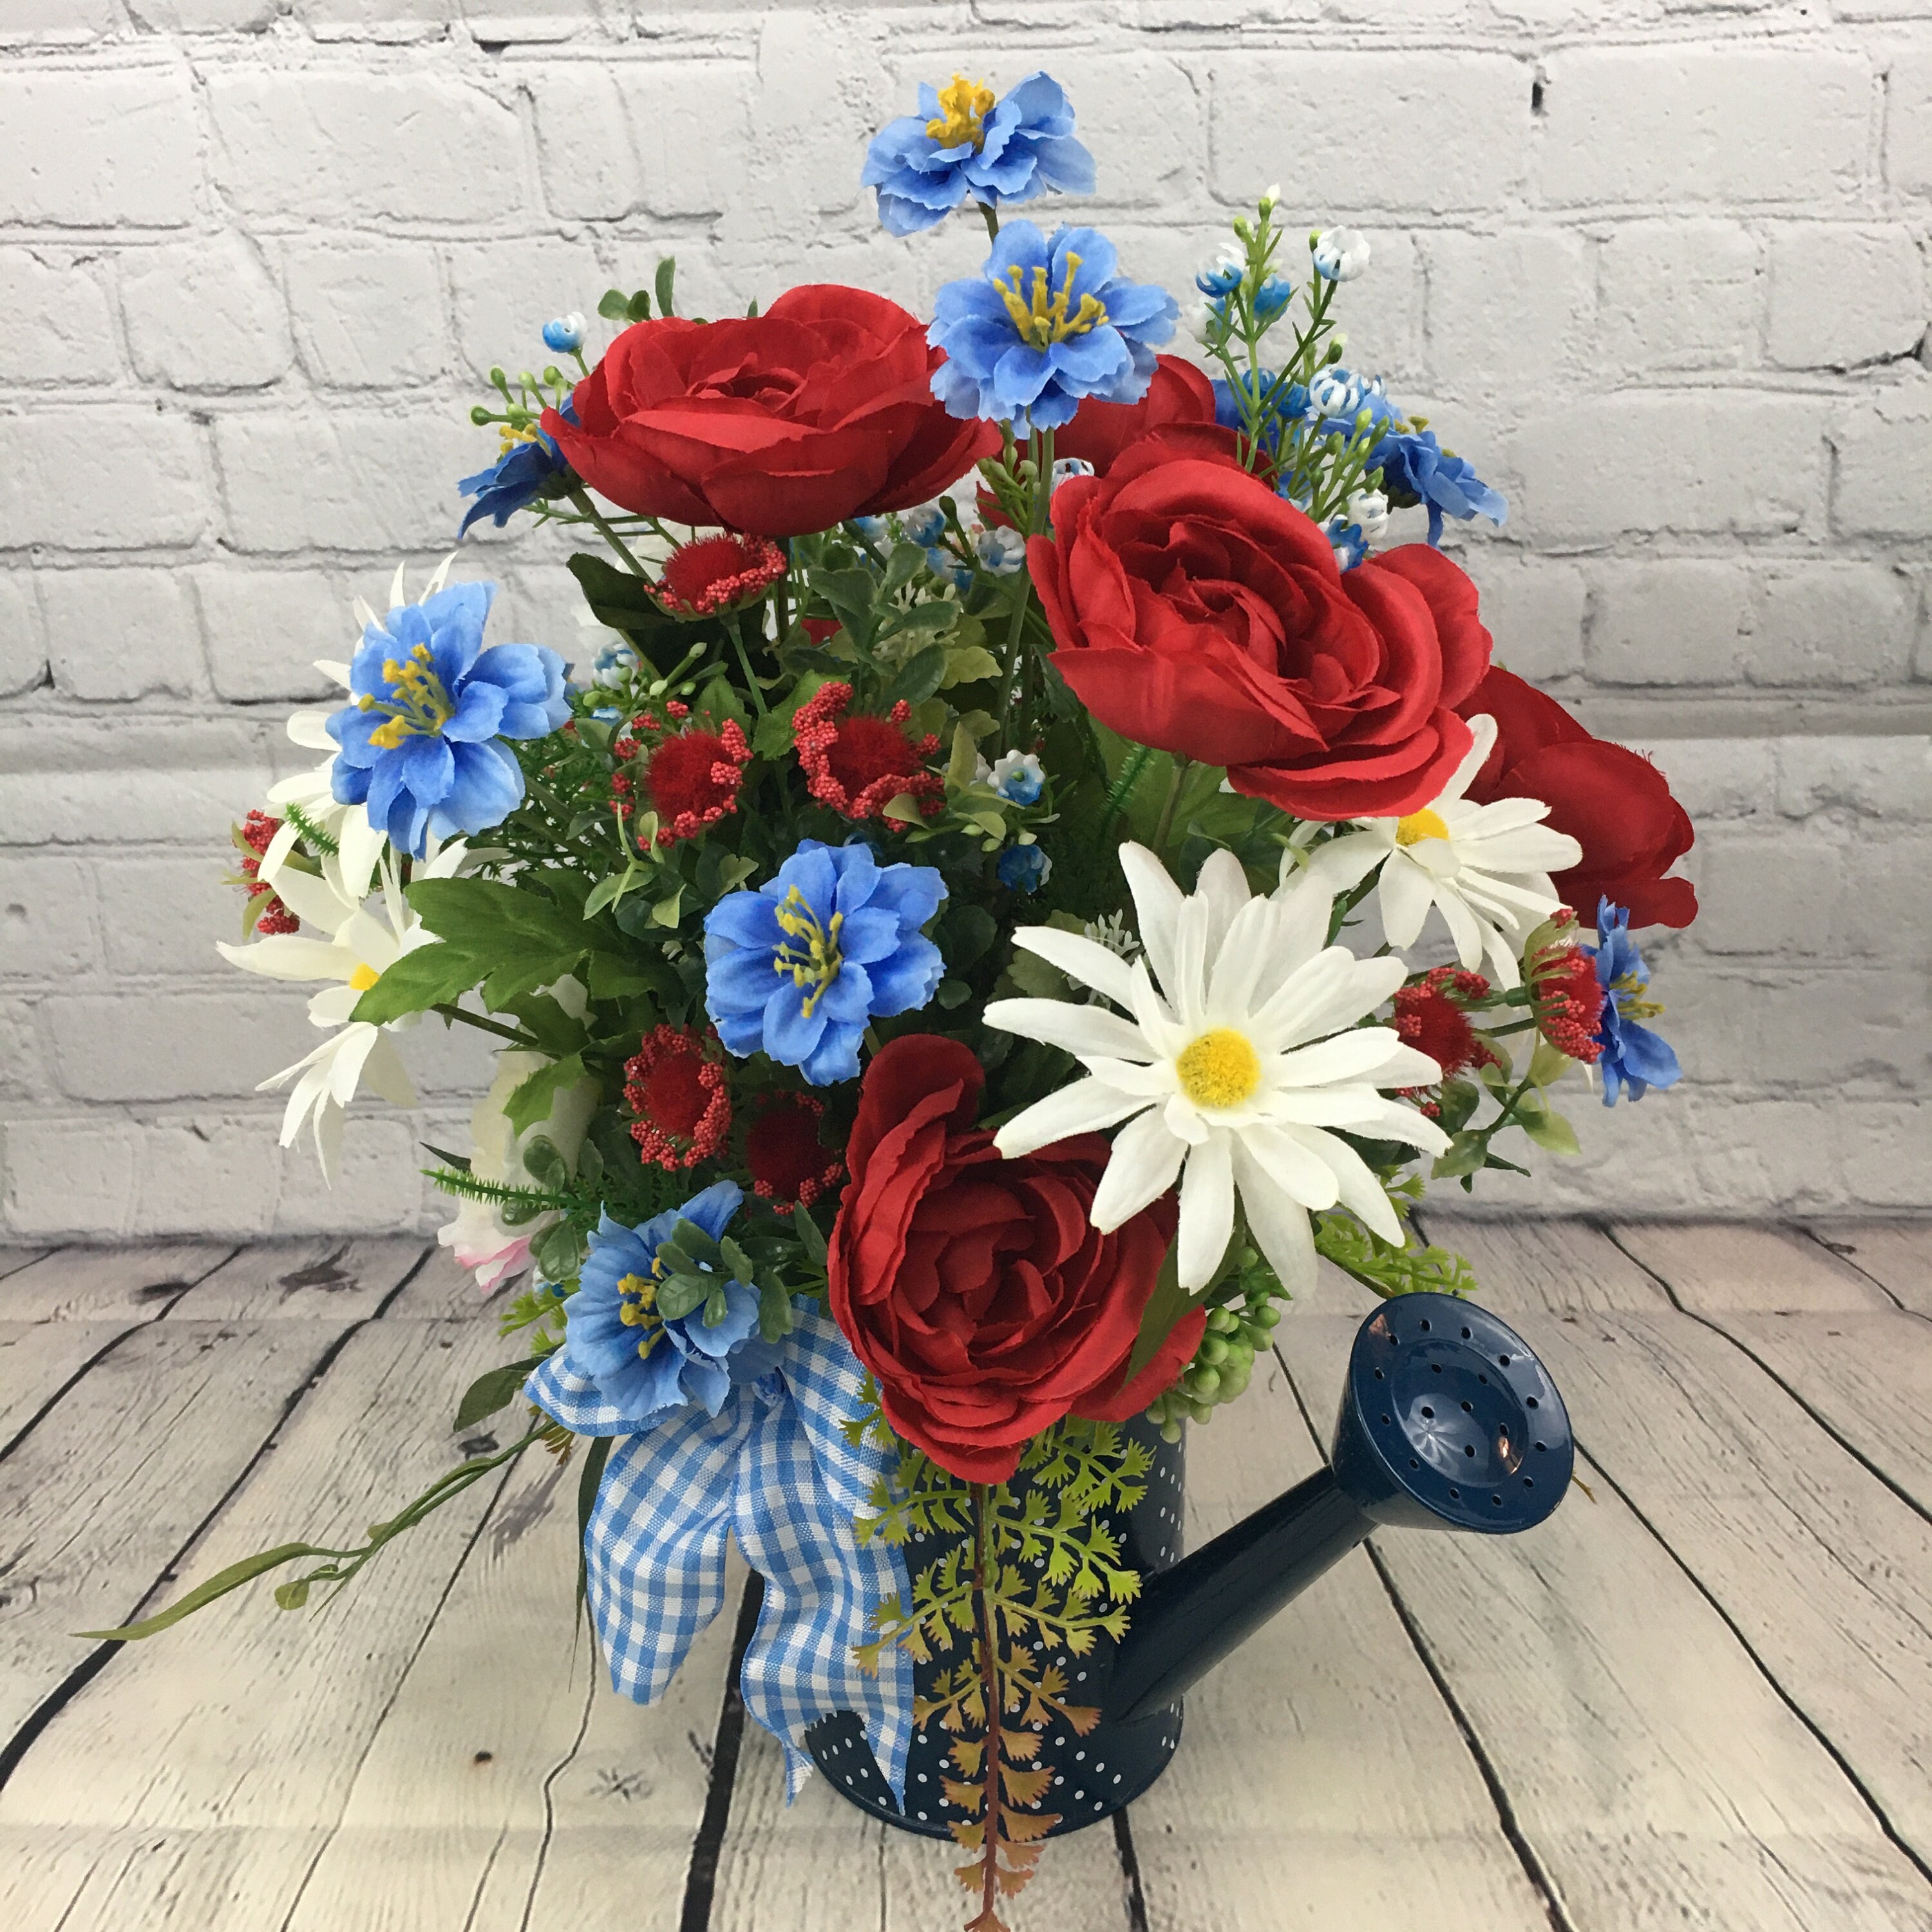 New! July 4th Red, White And Blue Big Daisy Design Retro Modern